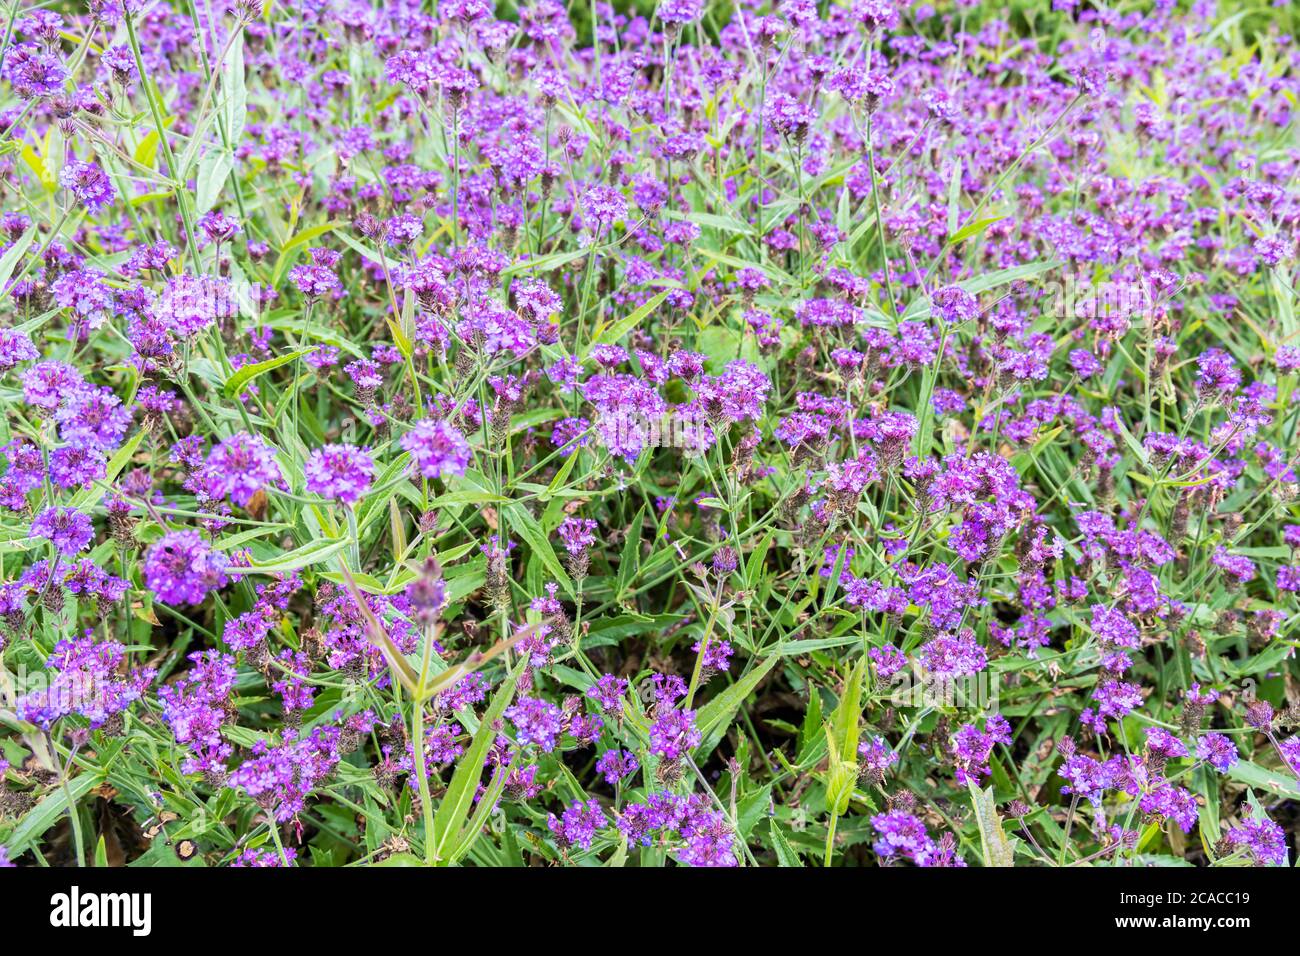 Verbena rigida also known as Slender vervain or Tuberous vervain. Stock Photo